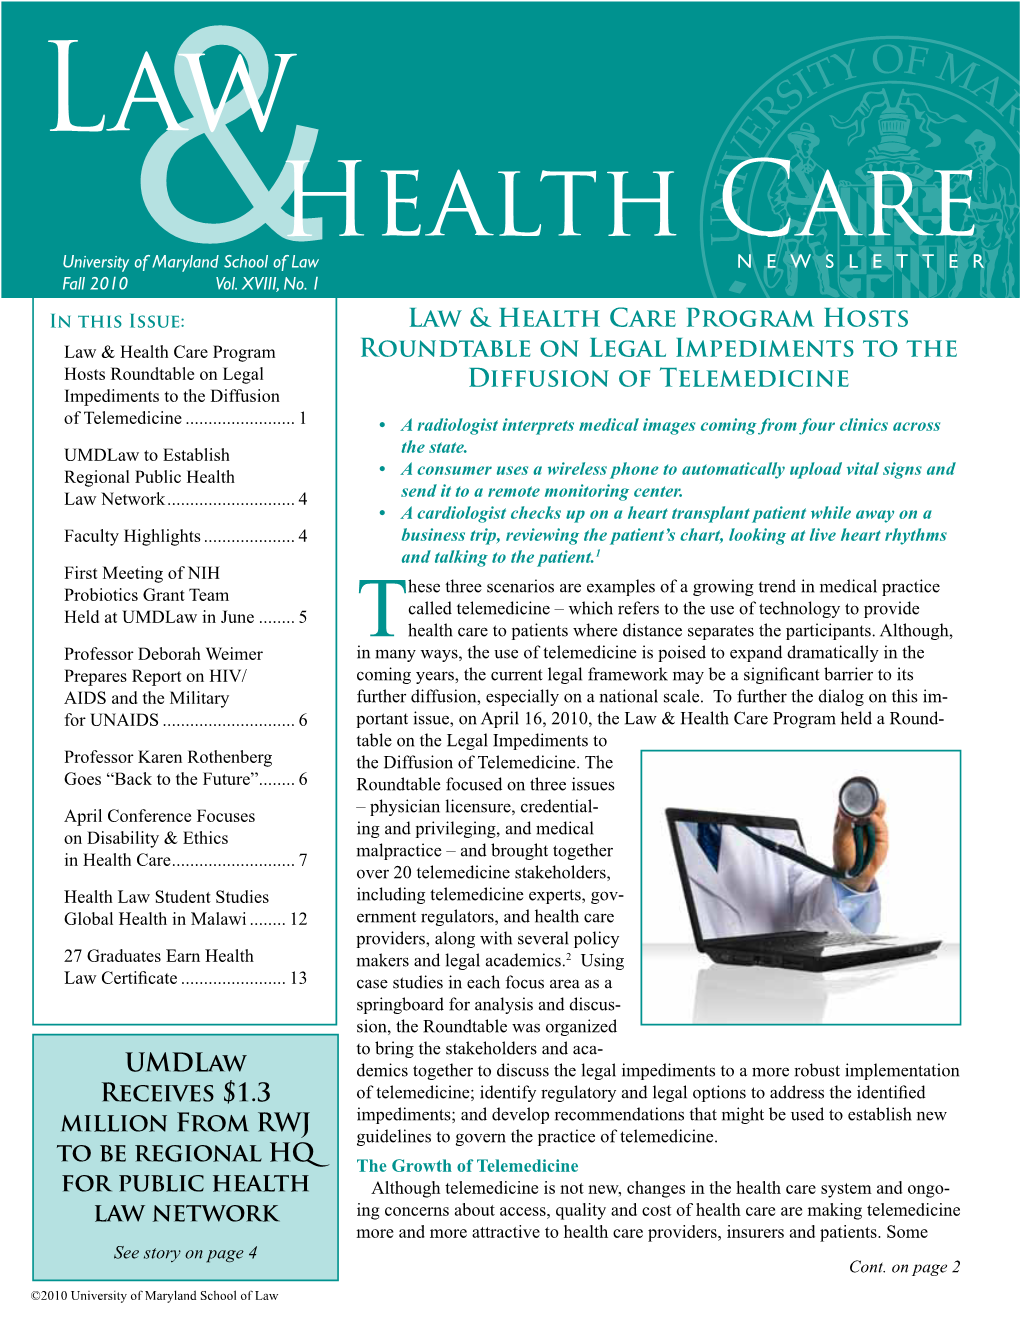 Health Care University of Maryland School of Law Newsletter Fall 2010 Vol